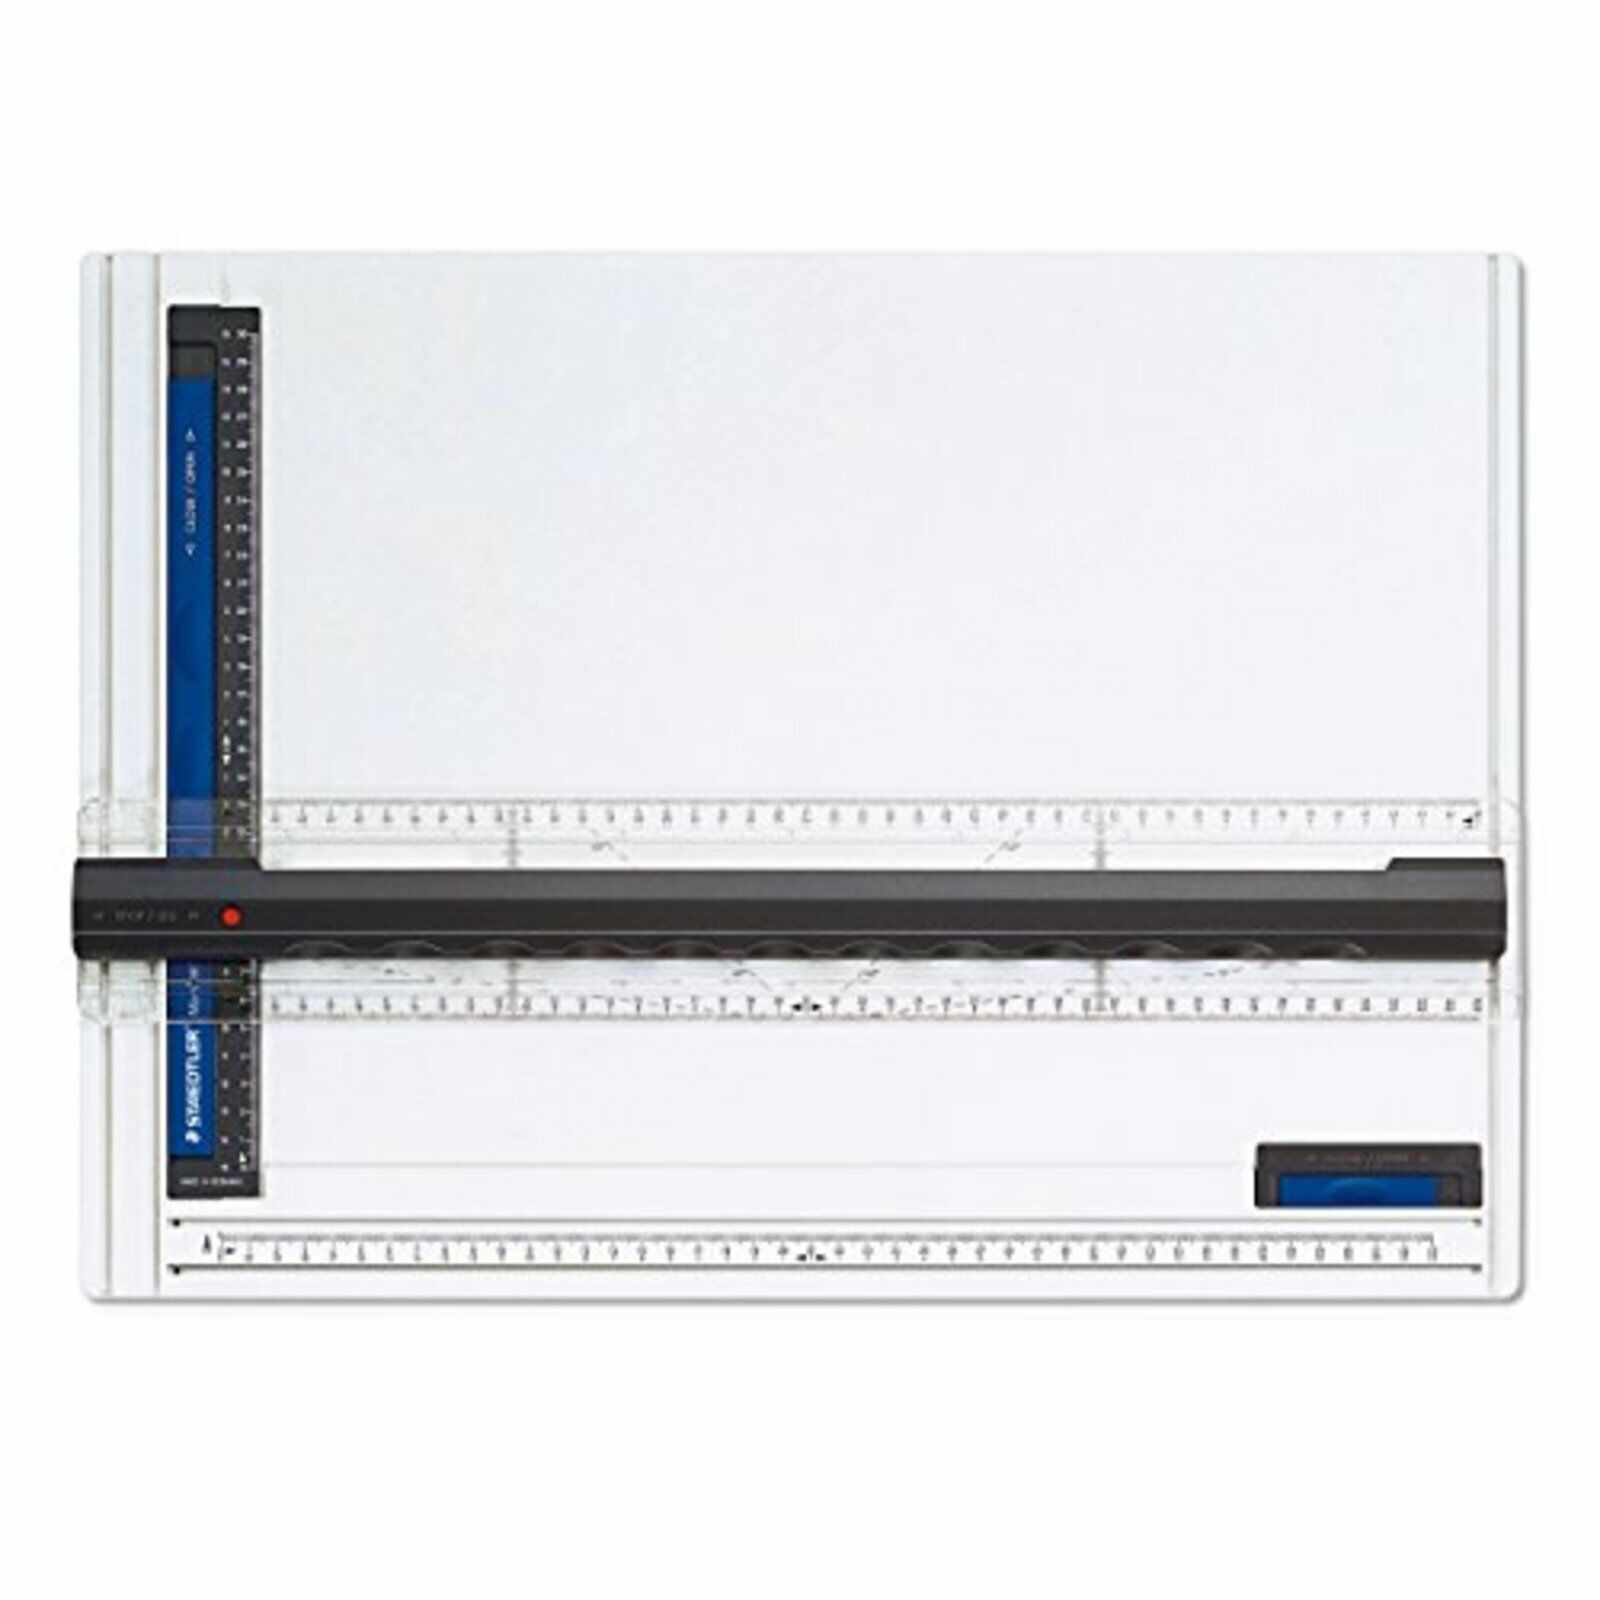 Max 75% OFF Staedtler drafting machine drawing board 66 Tecnico A3 Credence Mars size